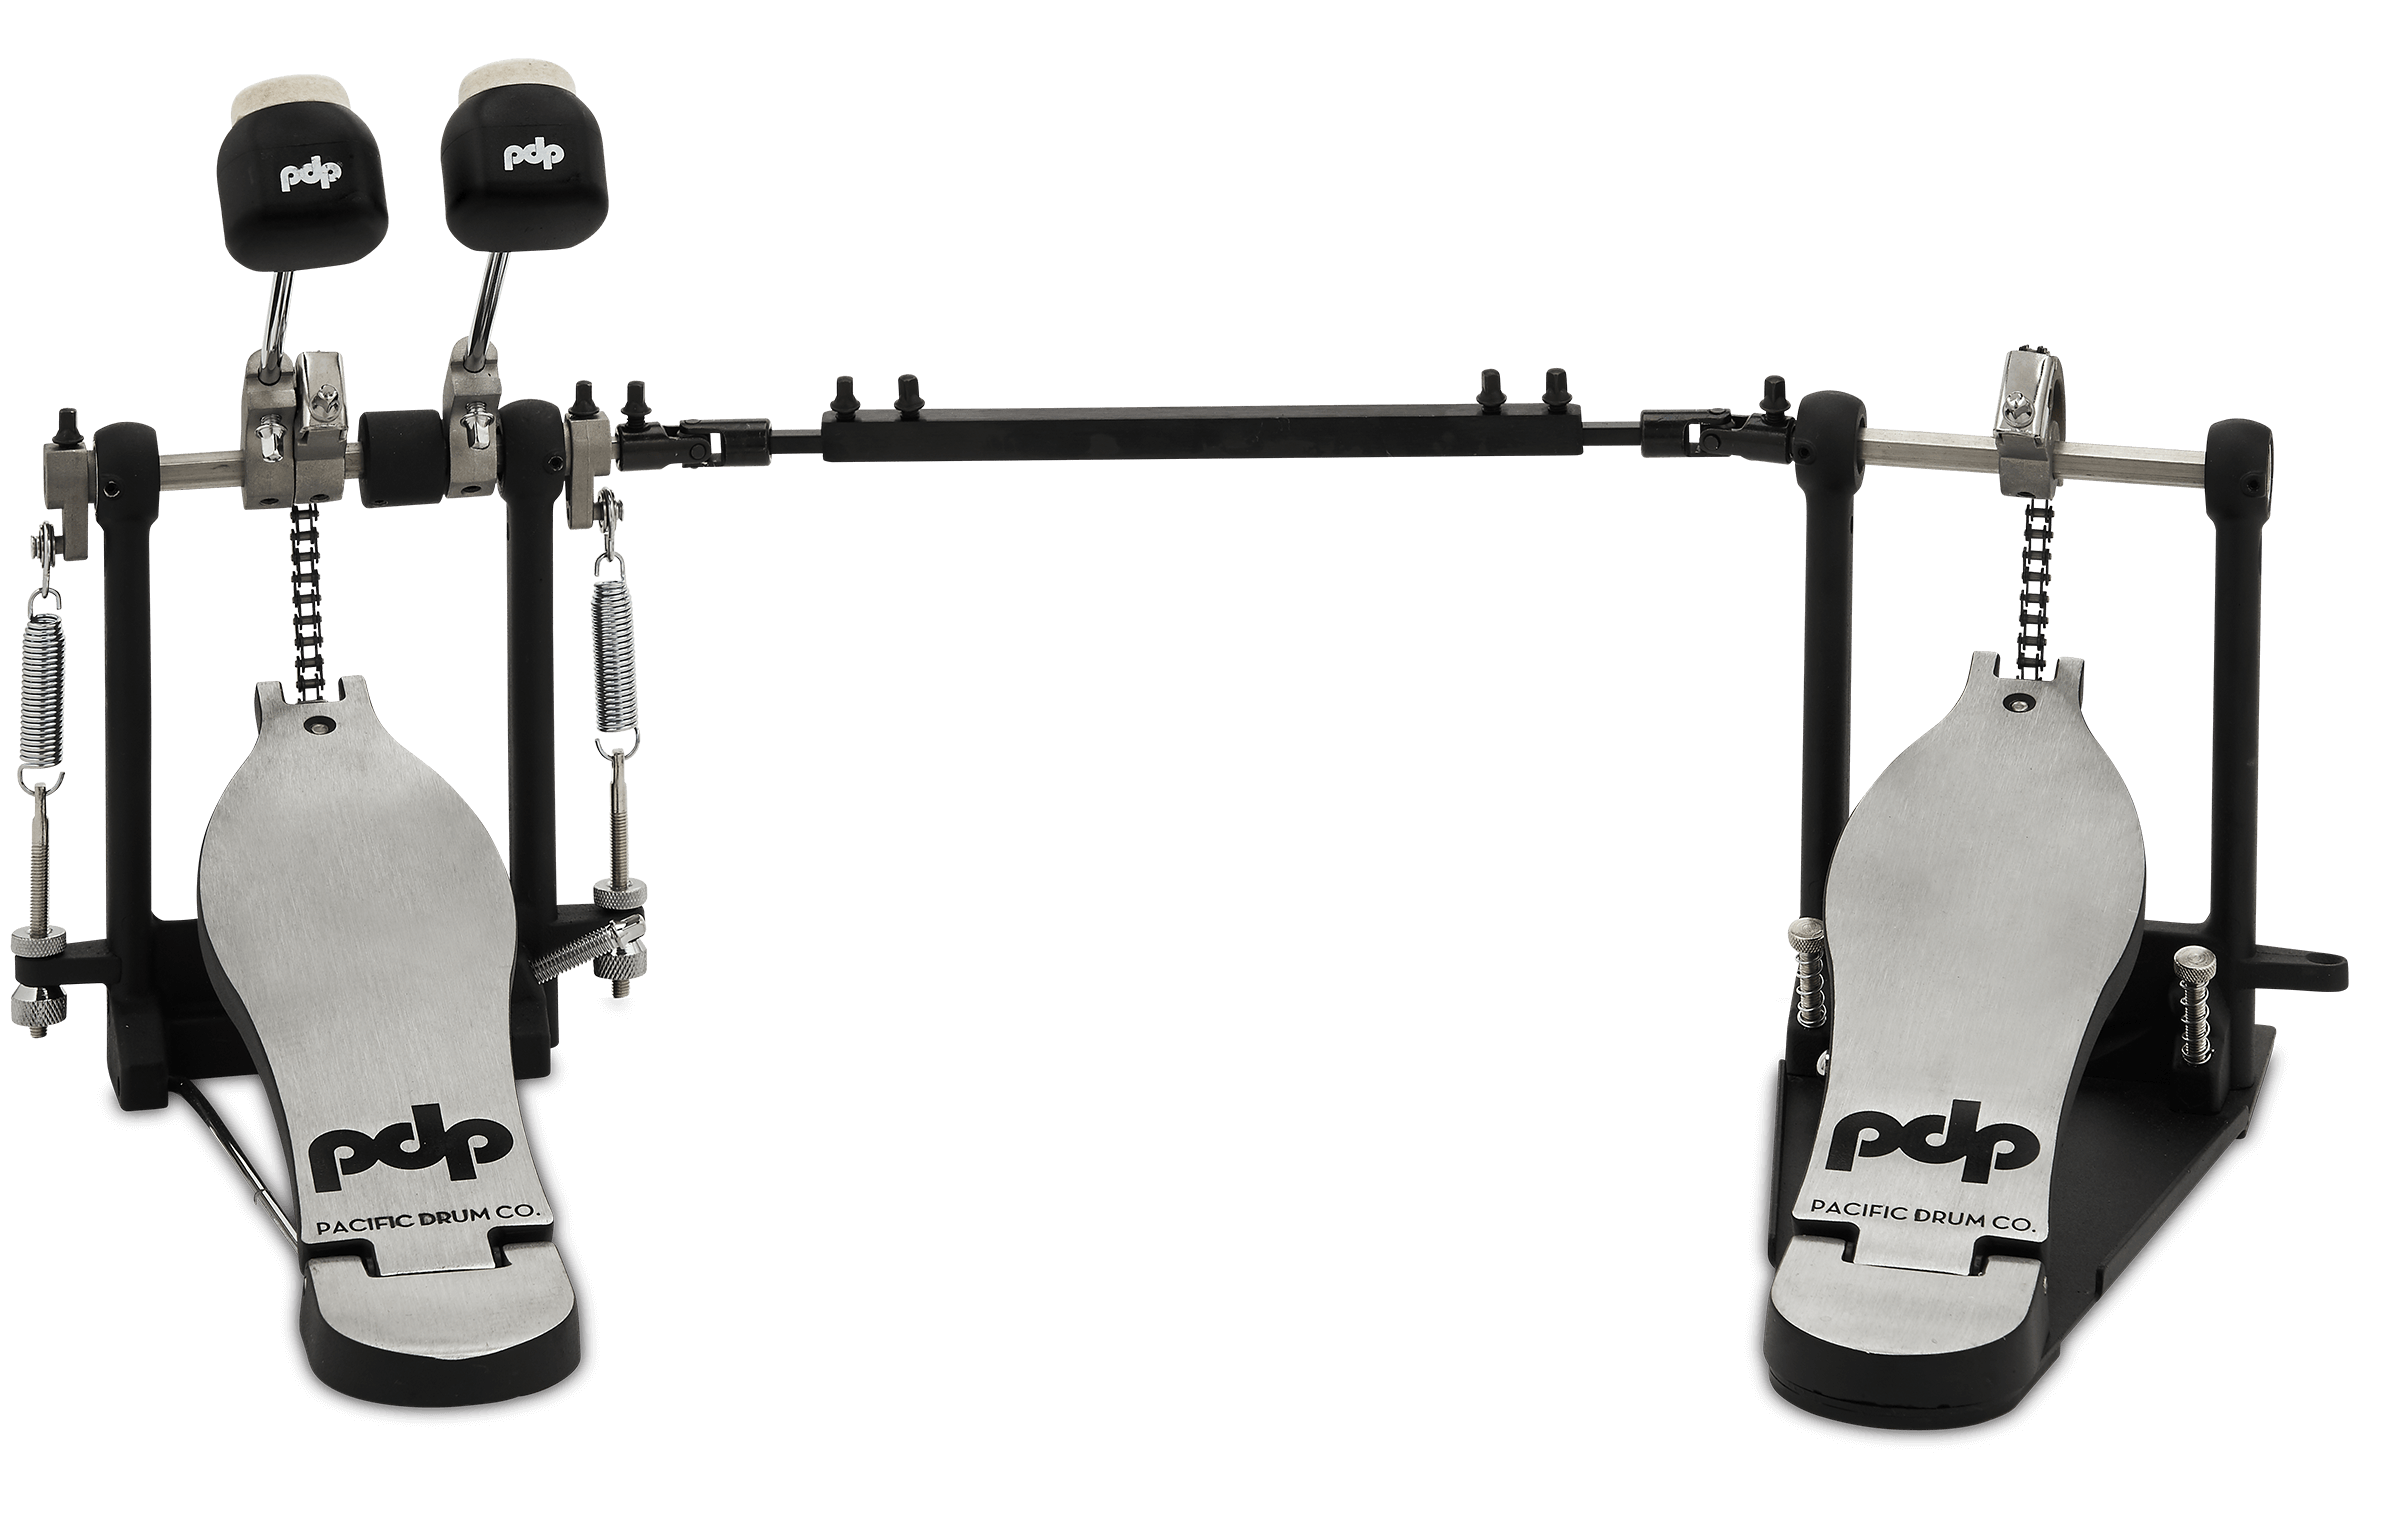 PDP PDDP712L 700 Series Double Bass Drum Pedal